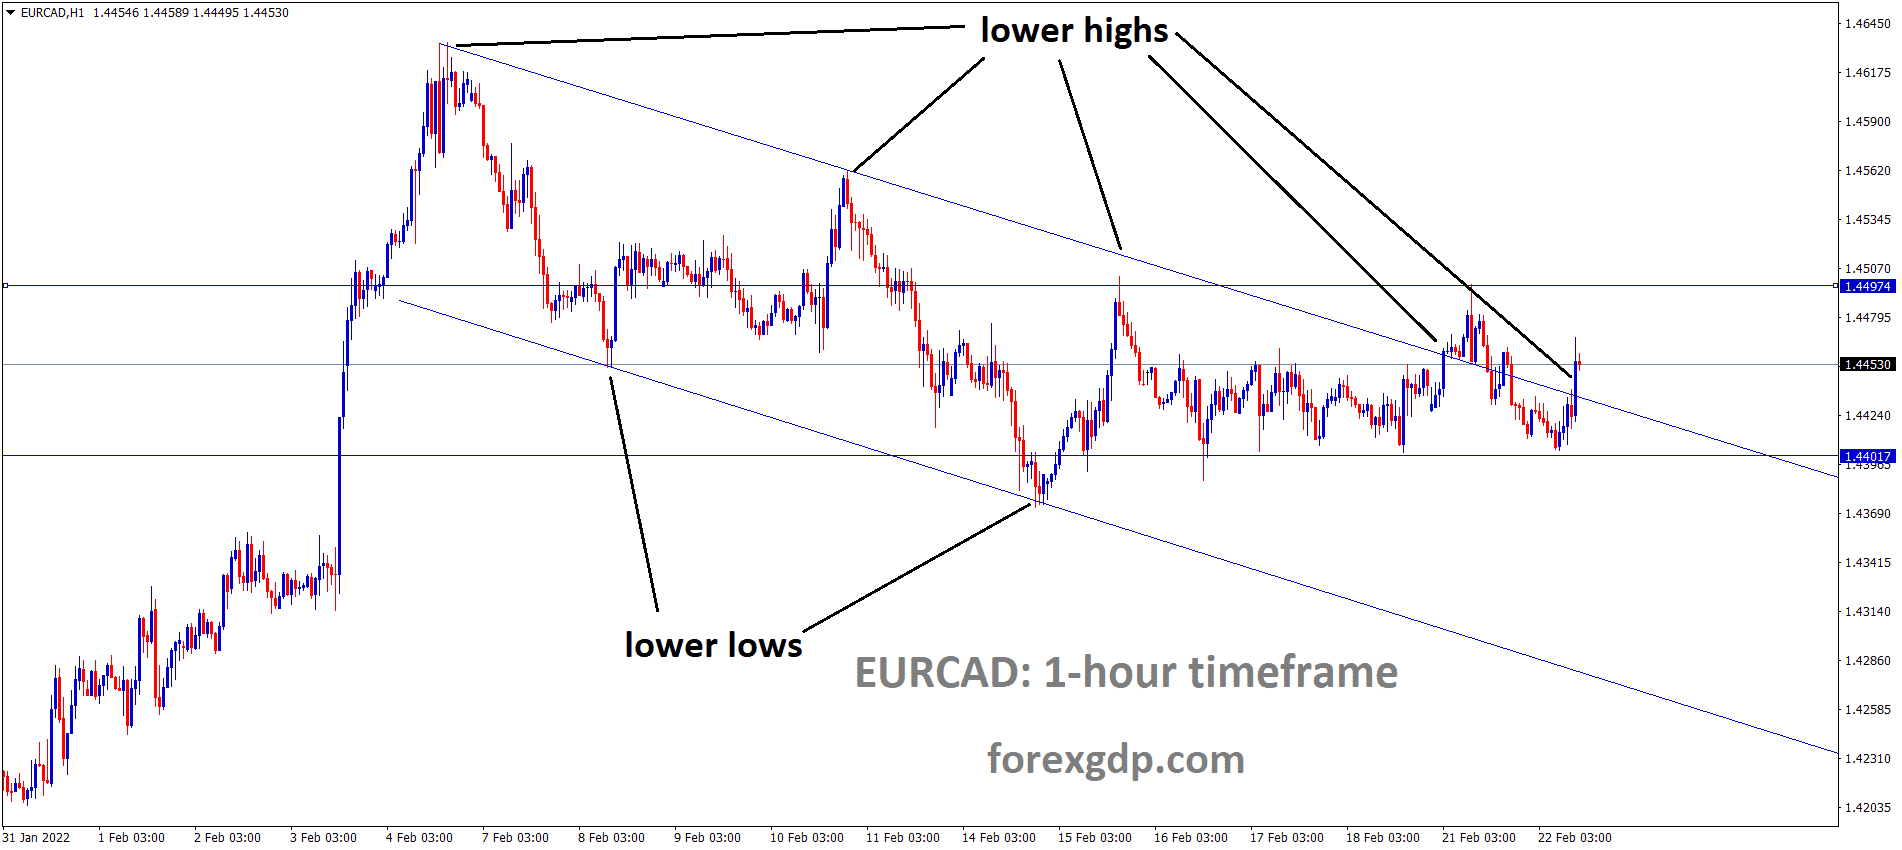 EURCAD is moving in the Descending channel and the market has reached the lower high area of the channel 1